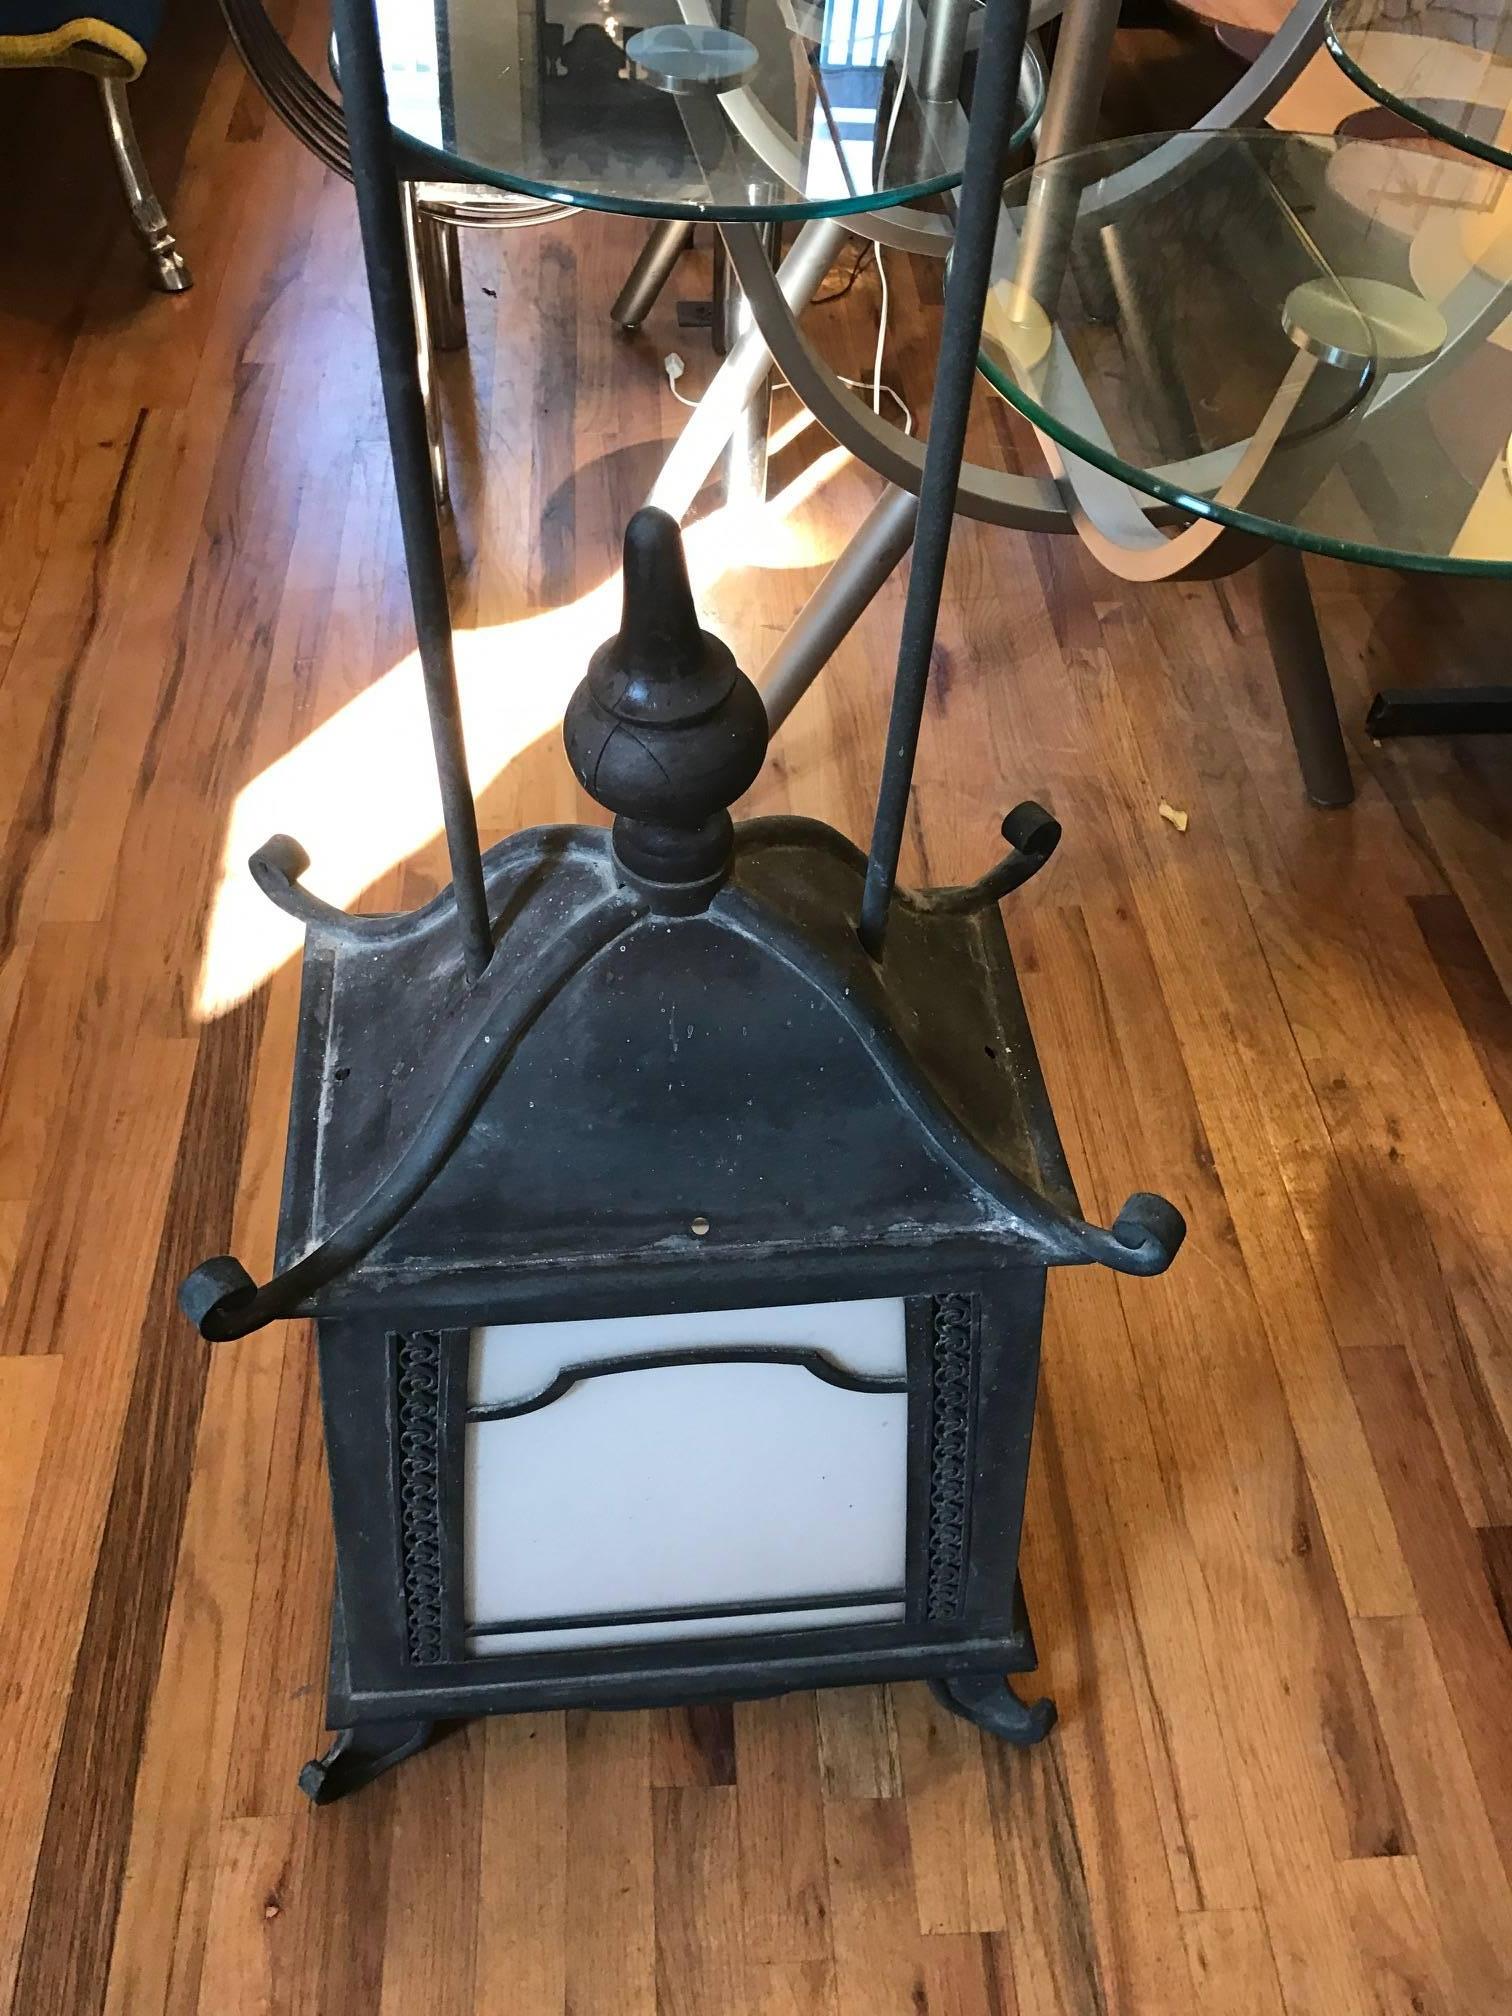 Chinoiserie pagoda style hanging lantern. The pagoda style lamp was originally hanging in the port cochere of the pool house at Wynwyd. Wynwyd constructed in 1922 is an Italian style villa overlooking the Indian Hill Country Club in Winnetka